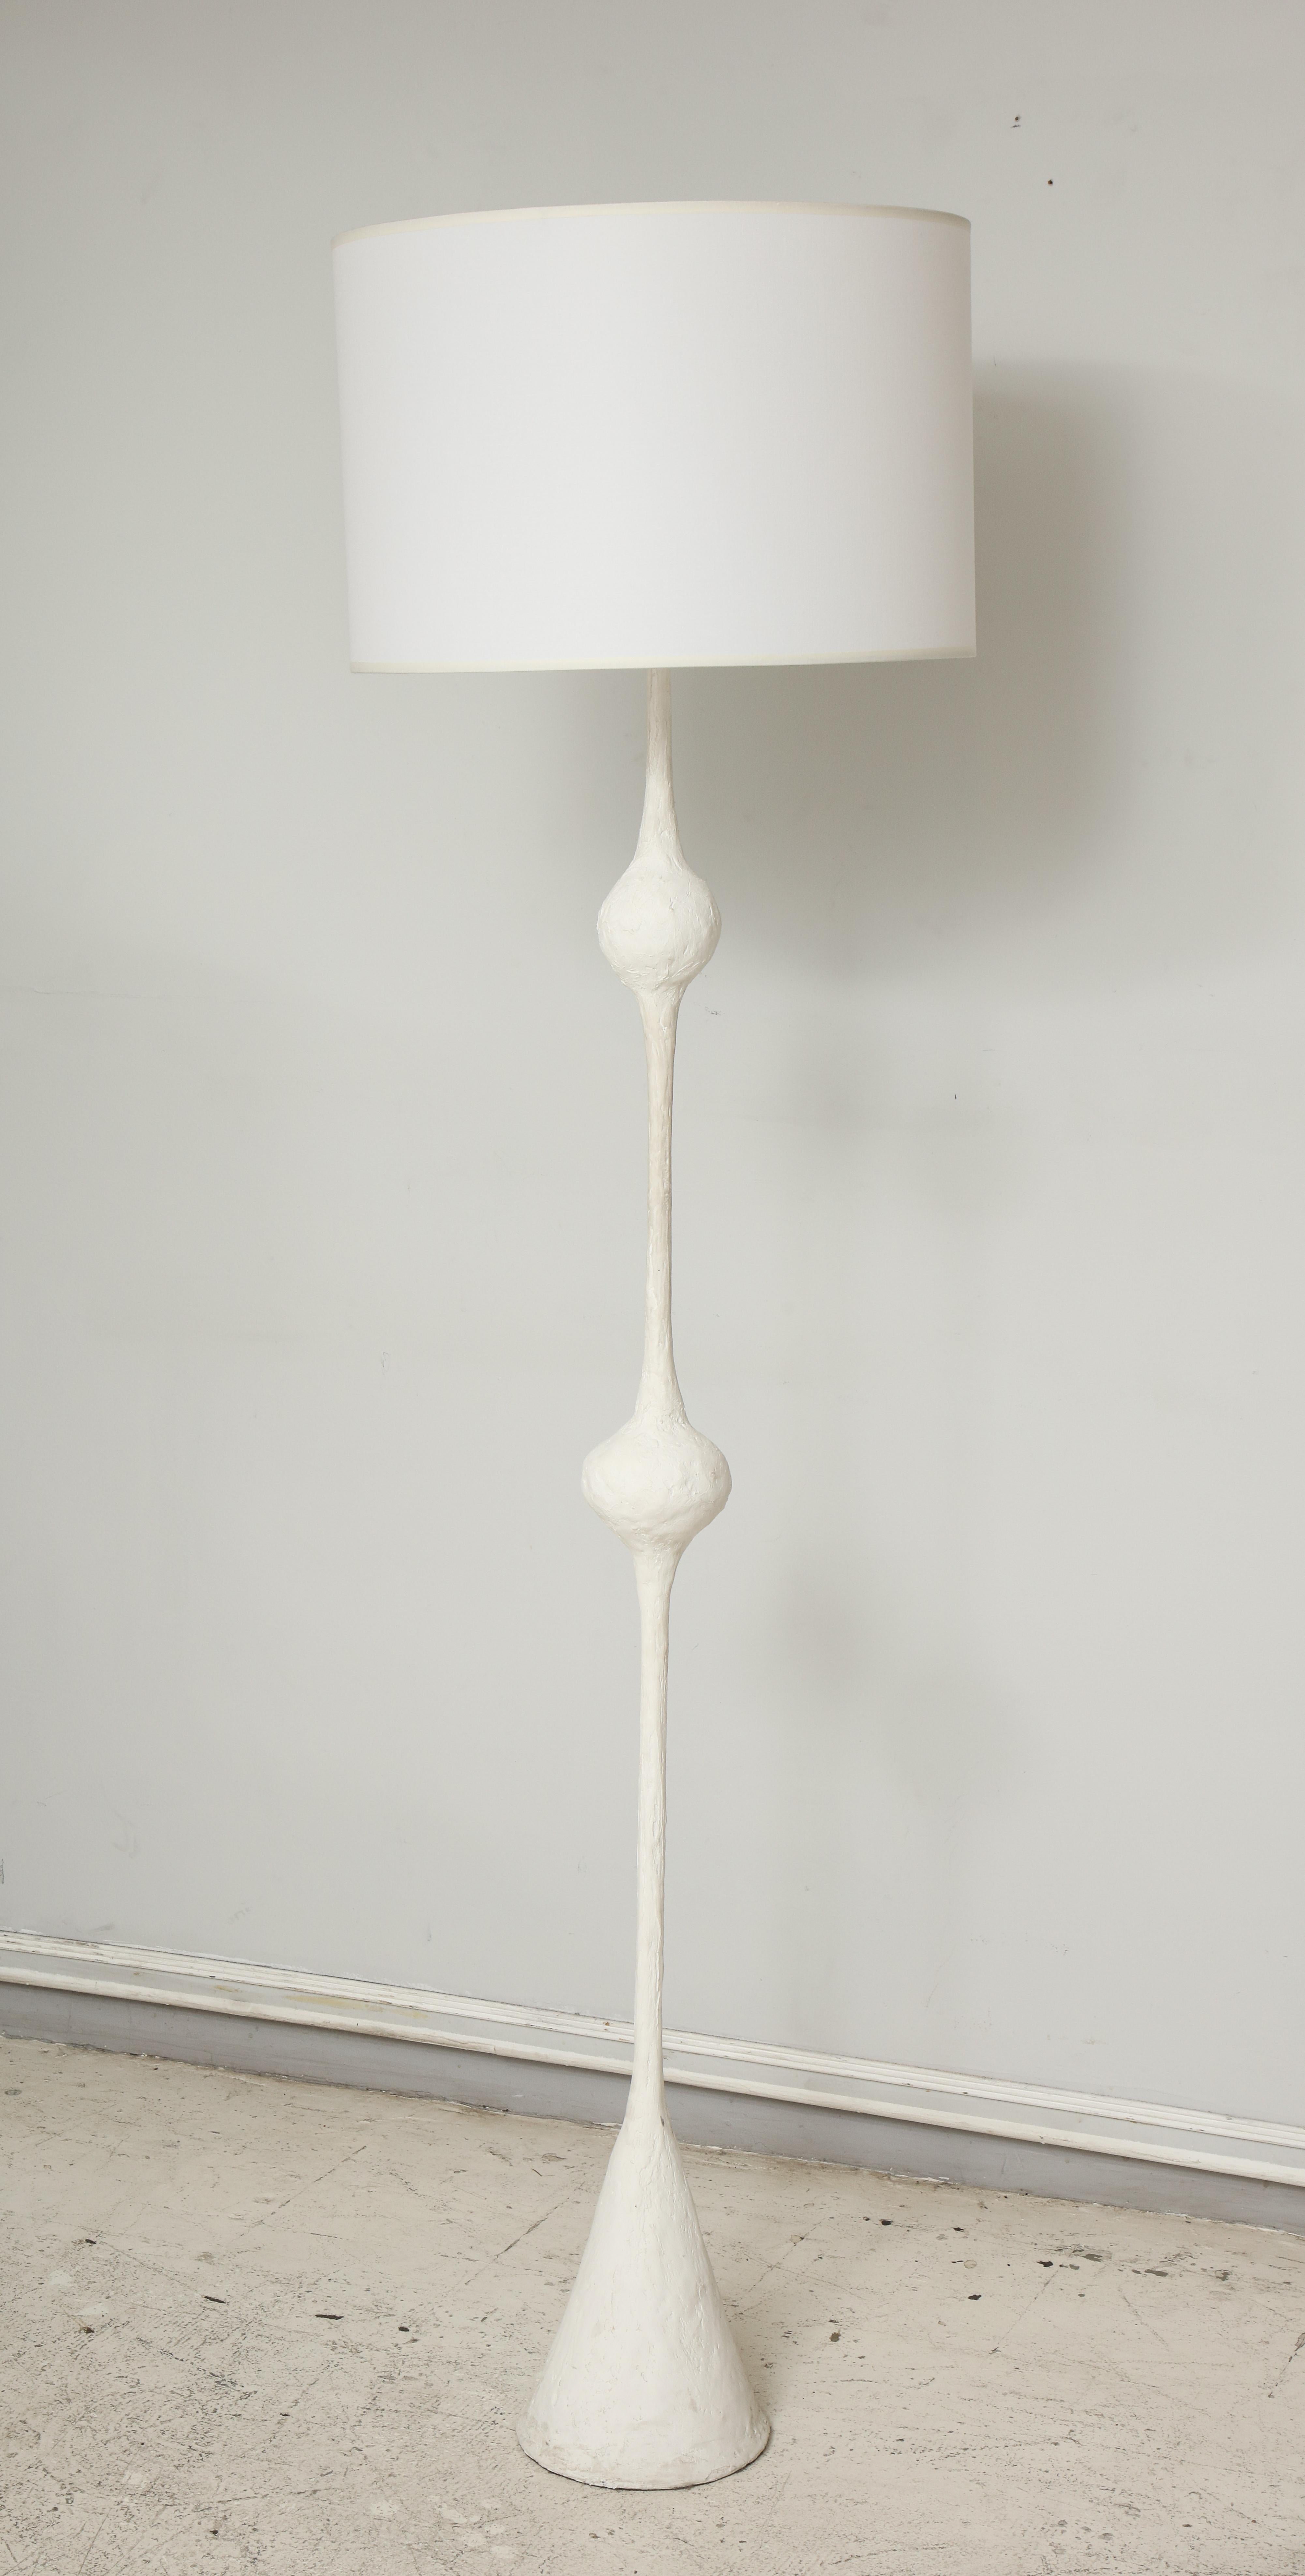 Custom handcrafted plaster floor lamp/ torchère in the Giacometti manner. 
Please note this floor lamp is customizable. Lead Time is 8-10 weeks.